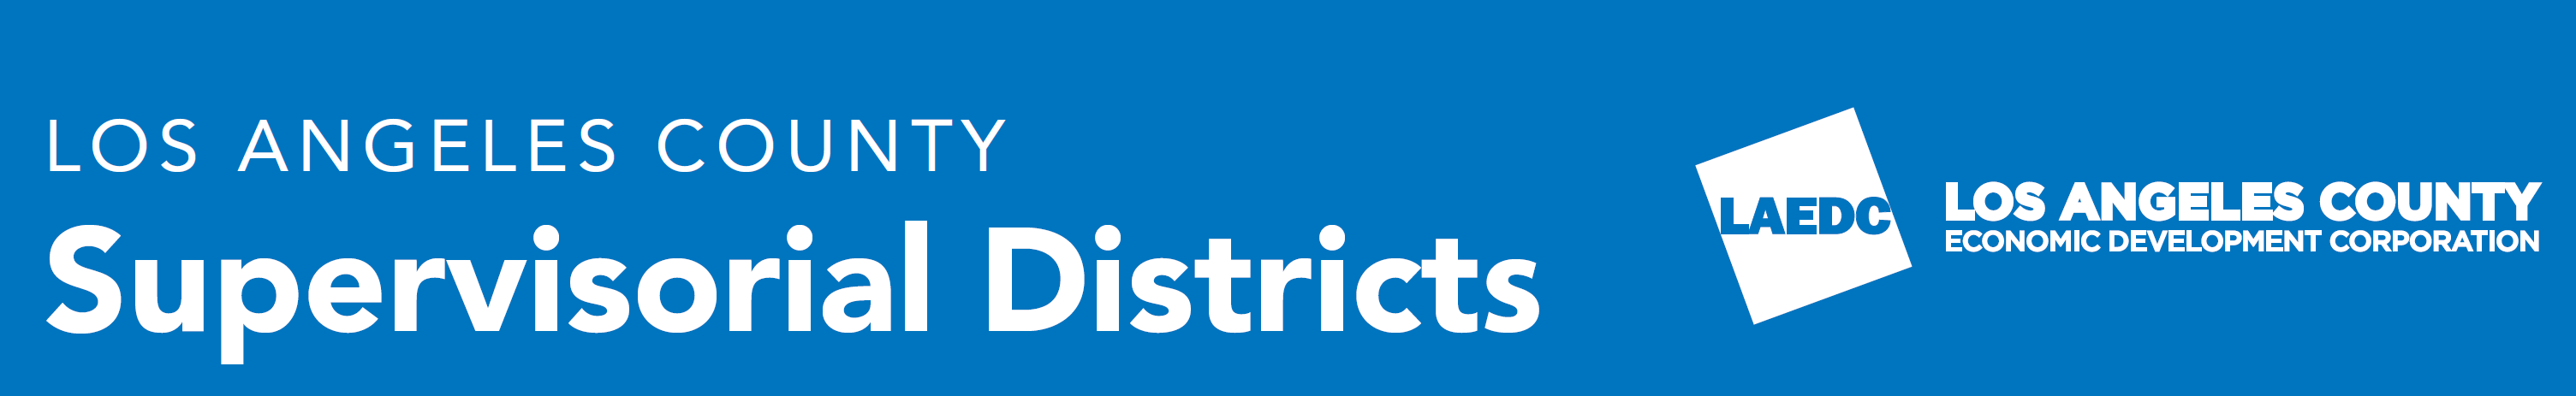 LA County Supervisorial Districts 2017